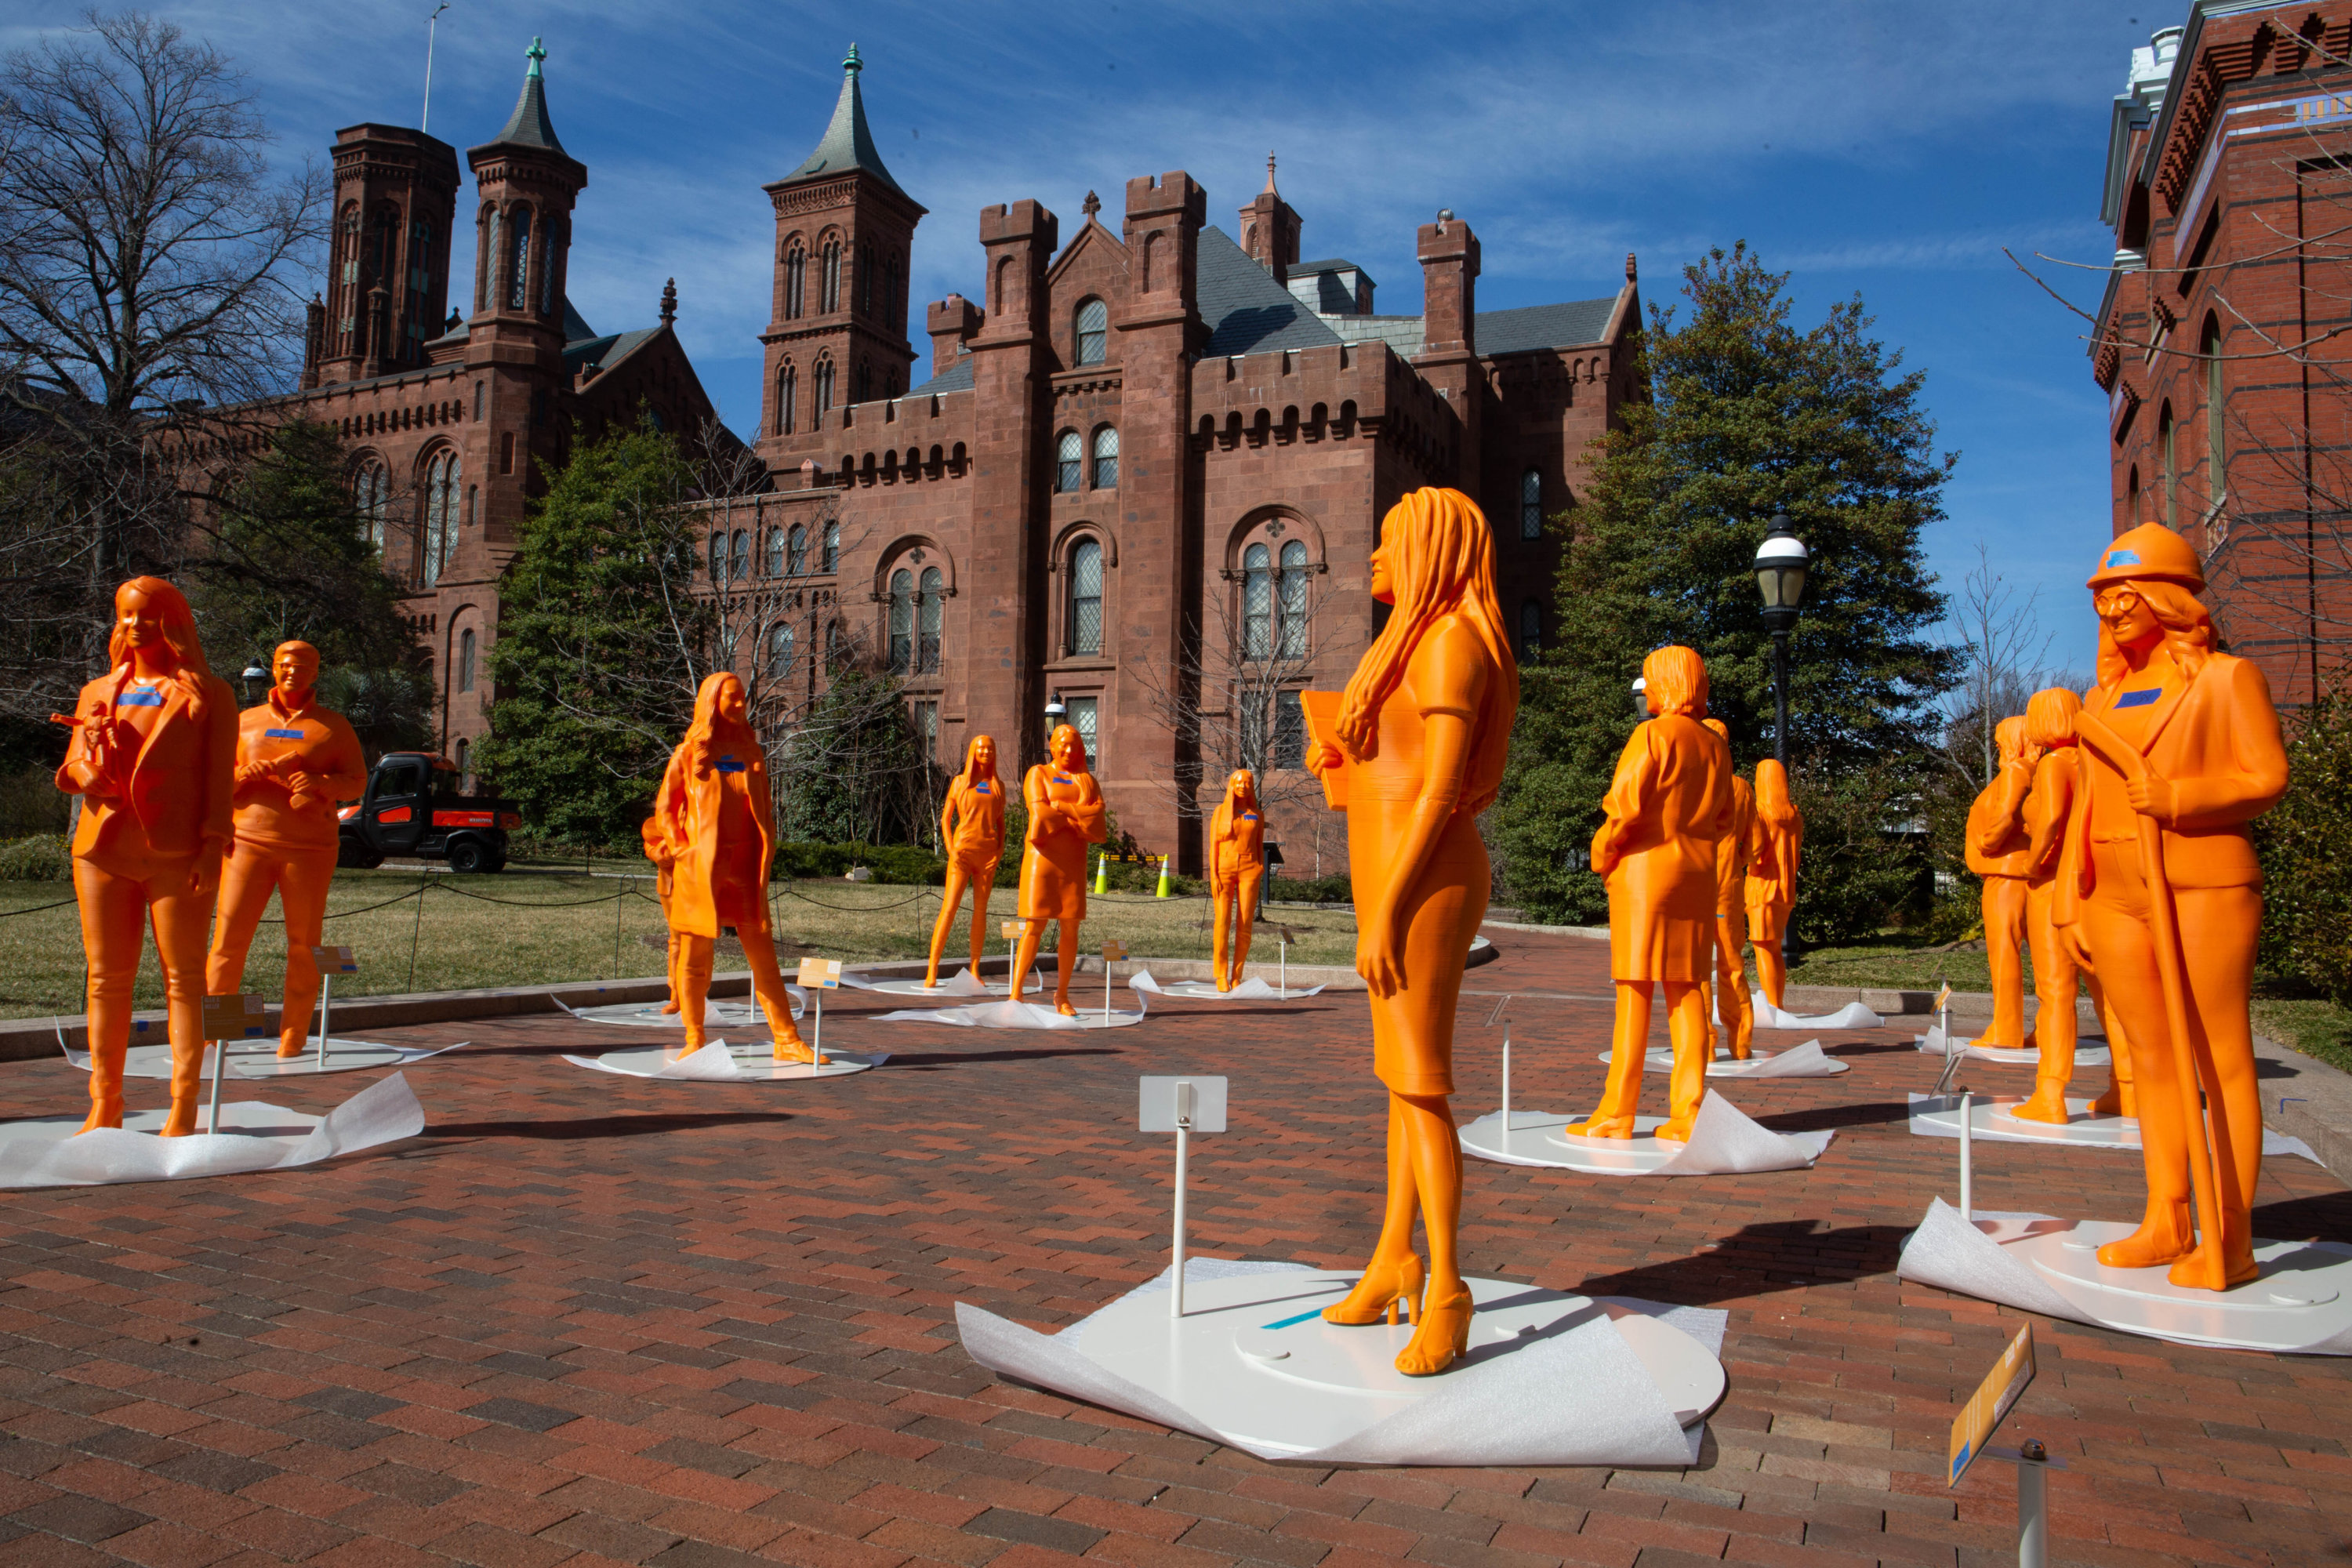 March 4: Statues celebrating women in STEM around Smithsonian Castle and the Arts and Industry Building.